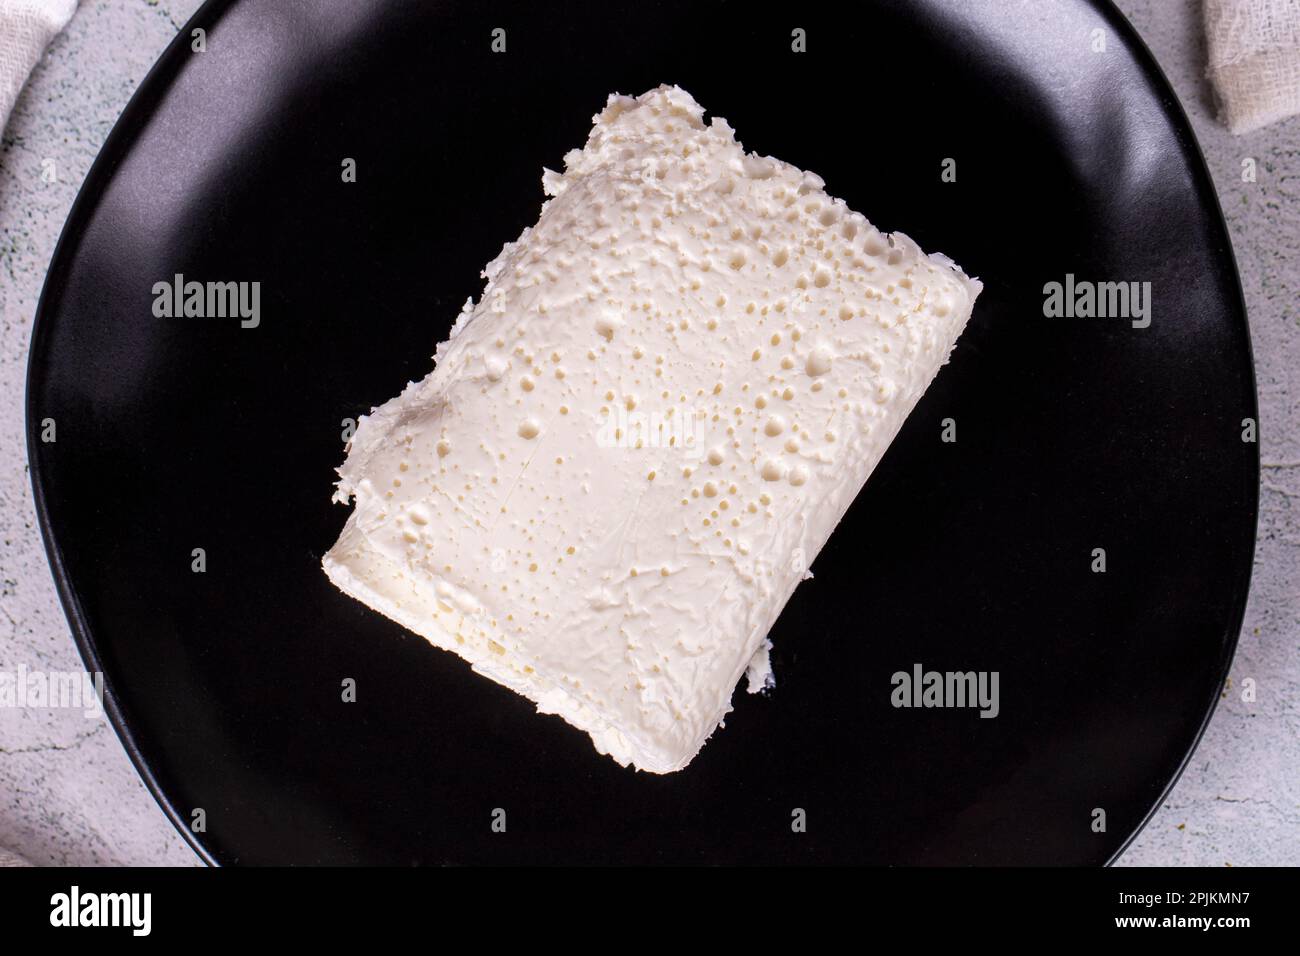 Clotted cream on gray background. Clotted cream (butter cream) for Turkish breakfast. local name inek kaymak. Top view Stock Photo